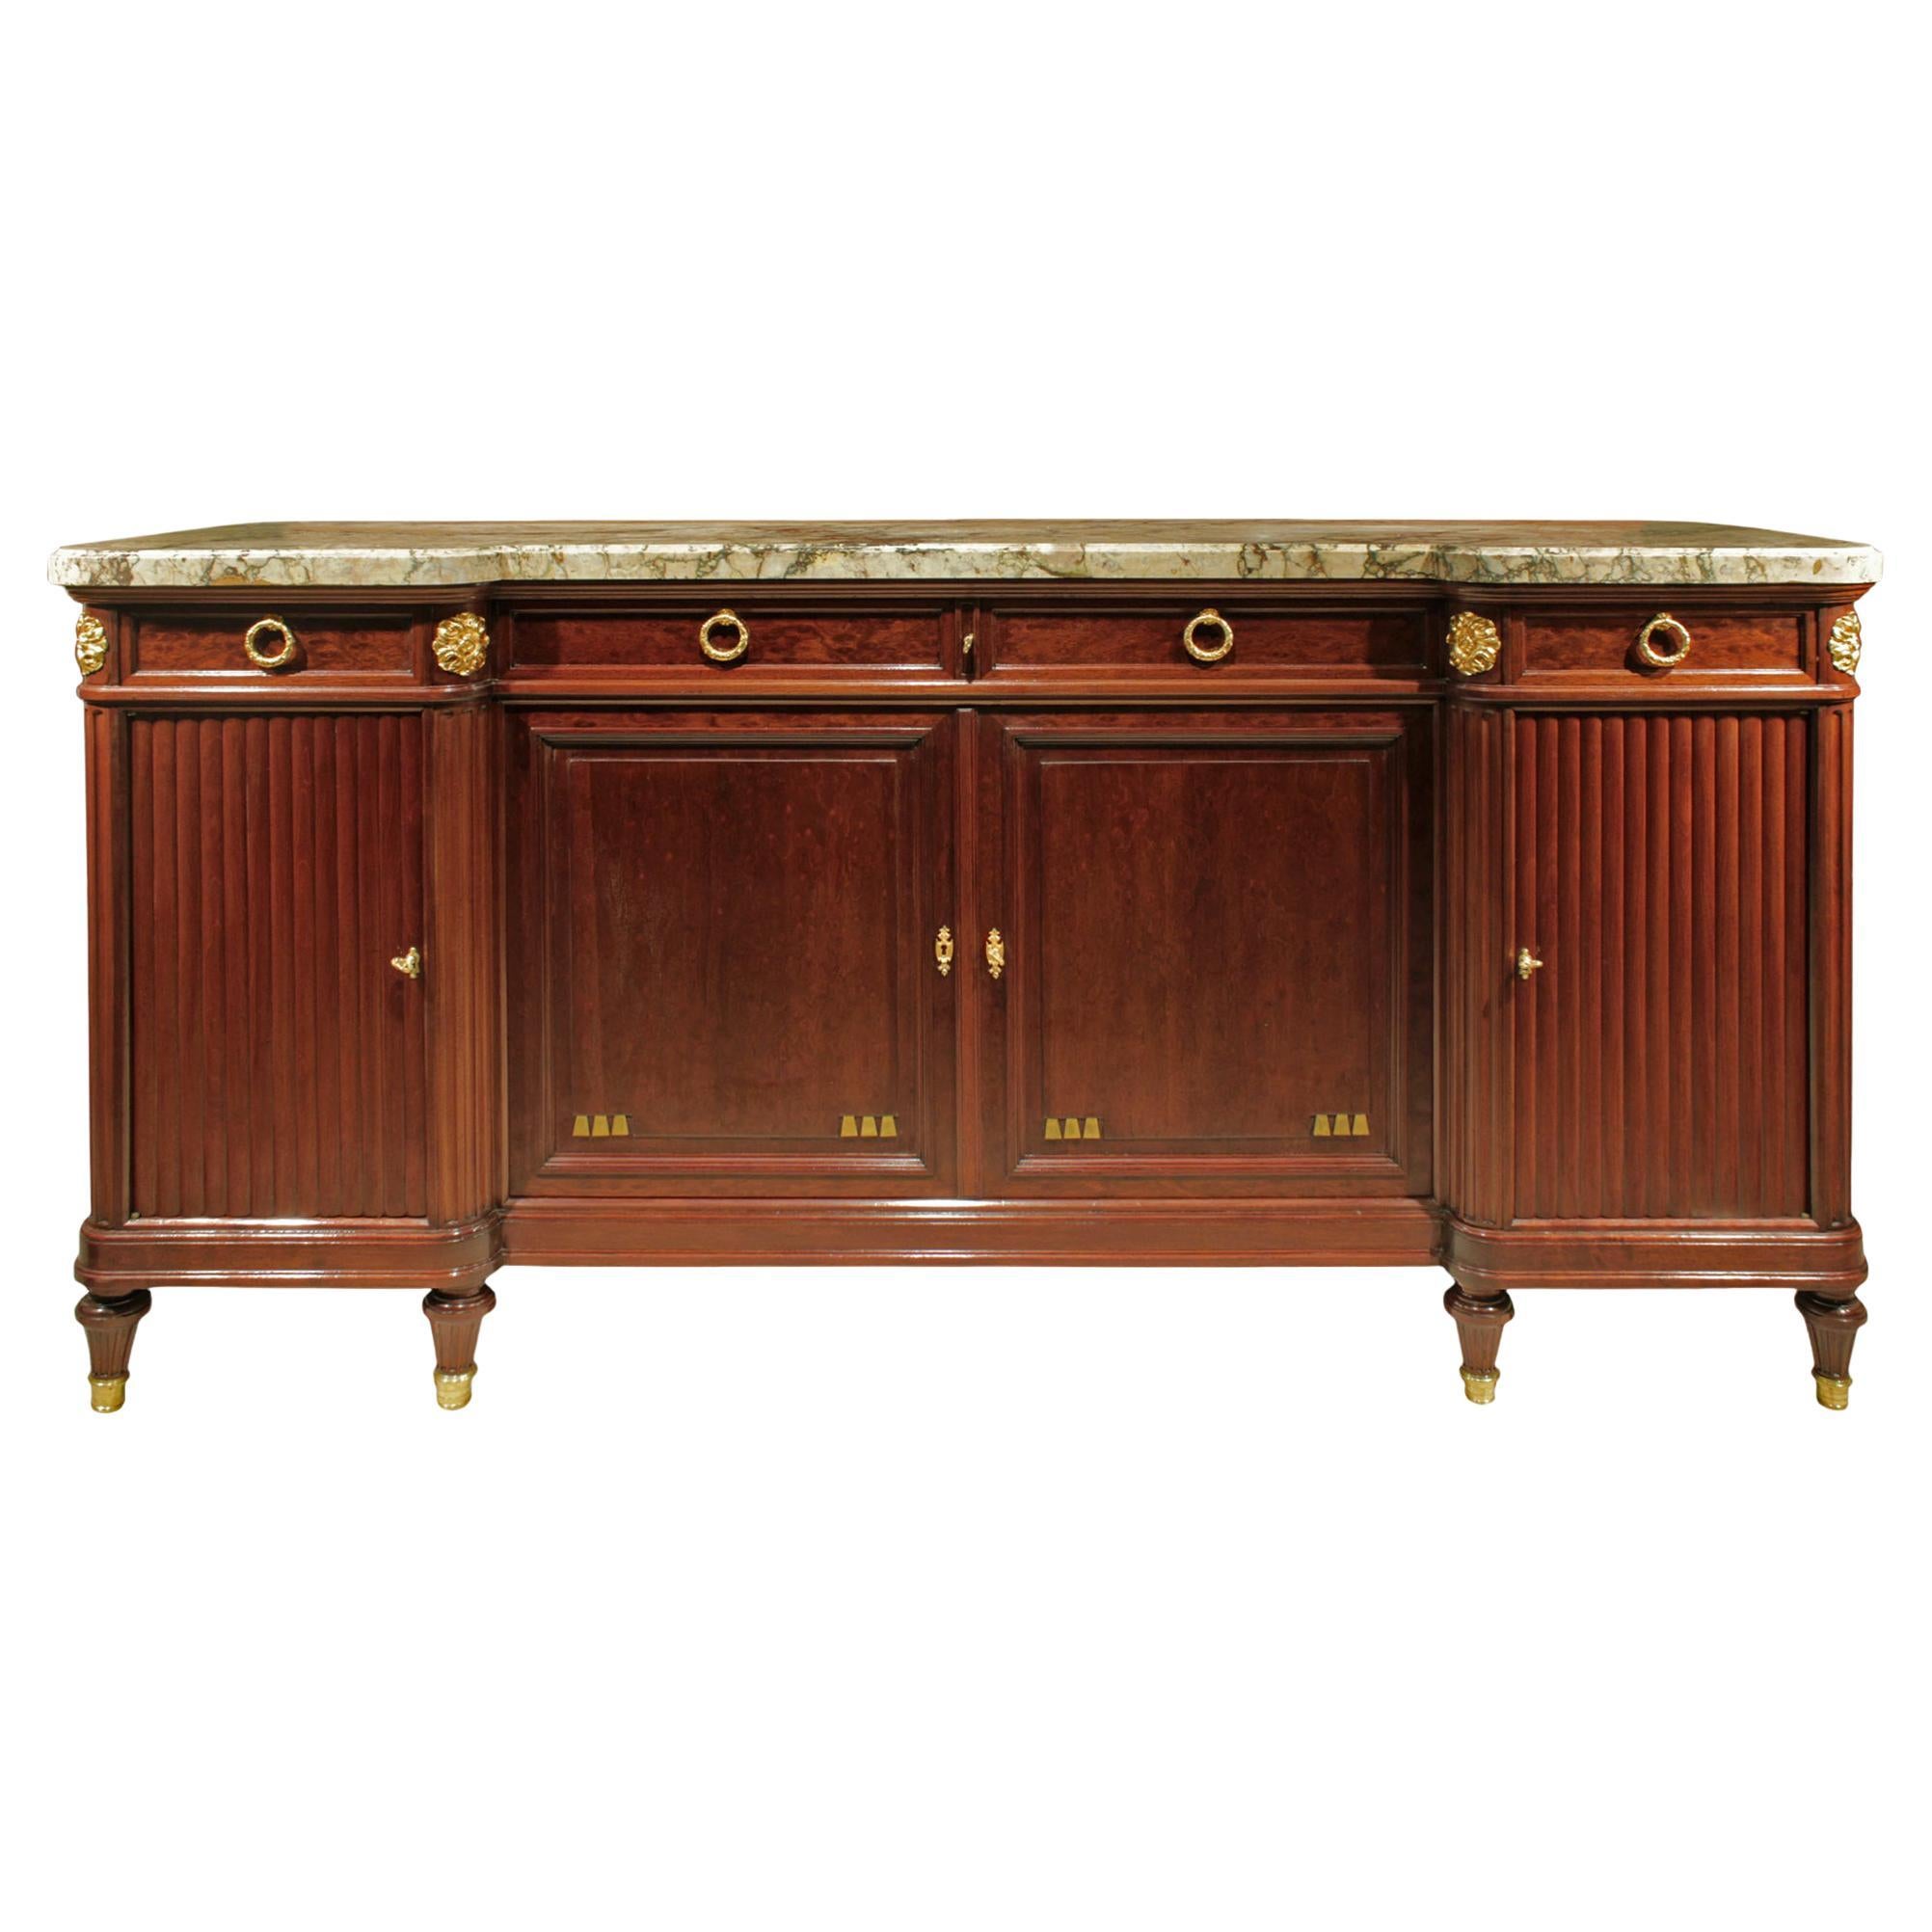 Late 19th Century Parisian Louis XVI Style Mahogany and Ormolu Mounted Buffet For Sale